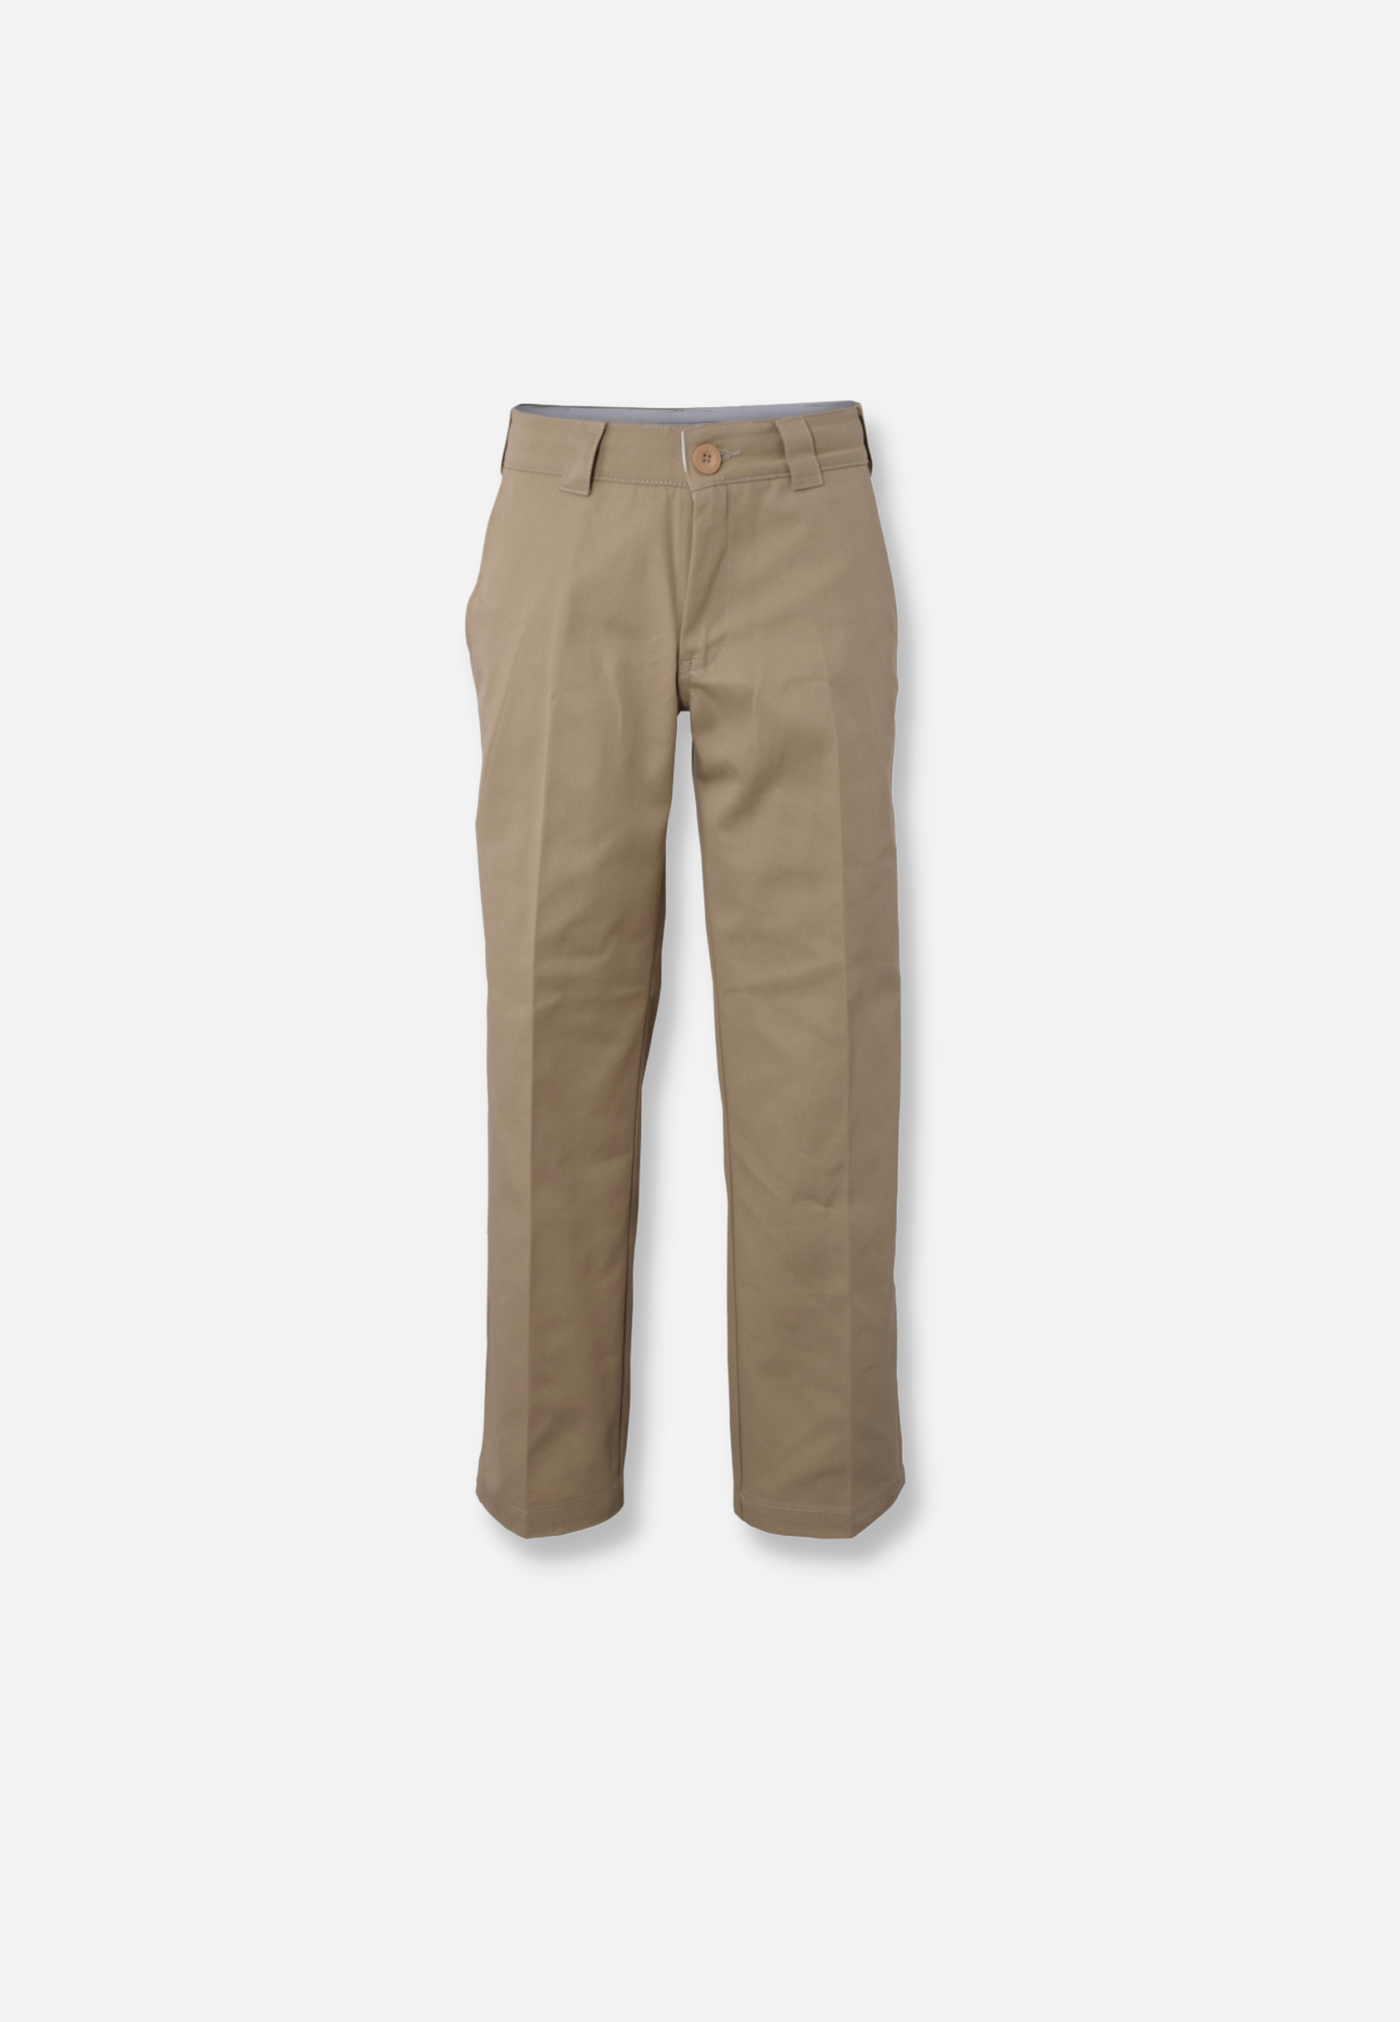 WIDE WORKER PANTS - SAND